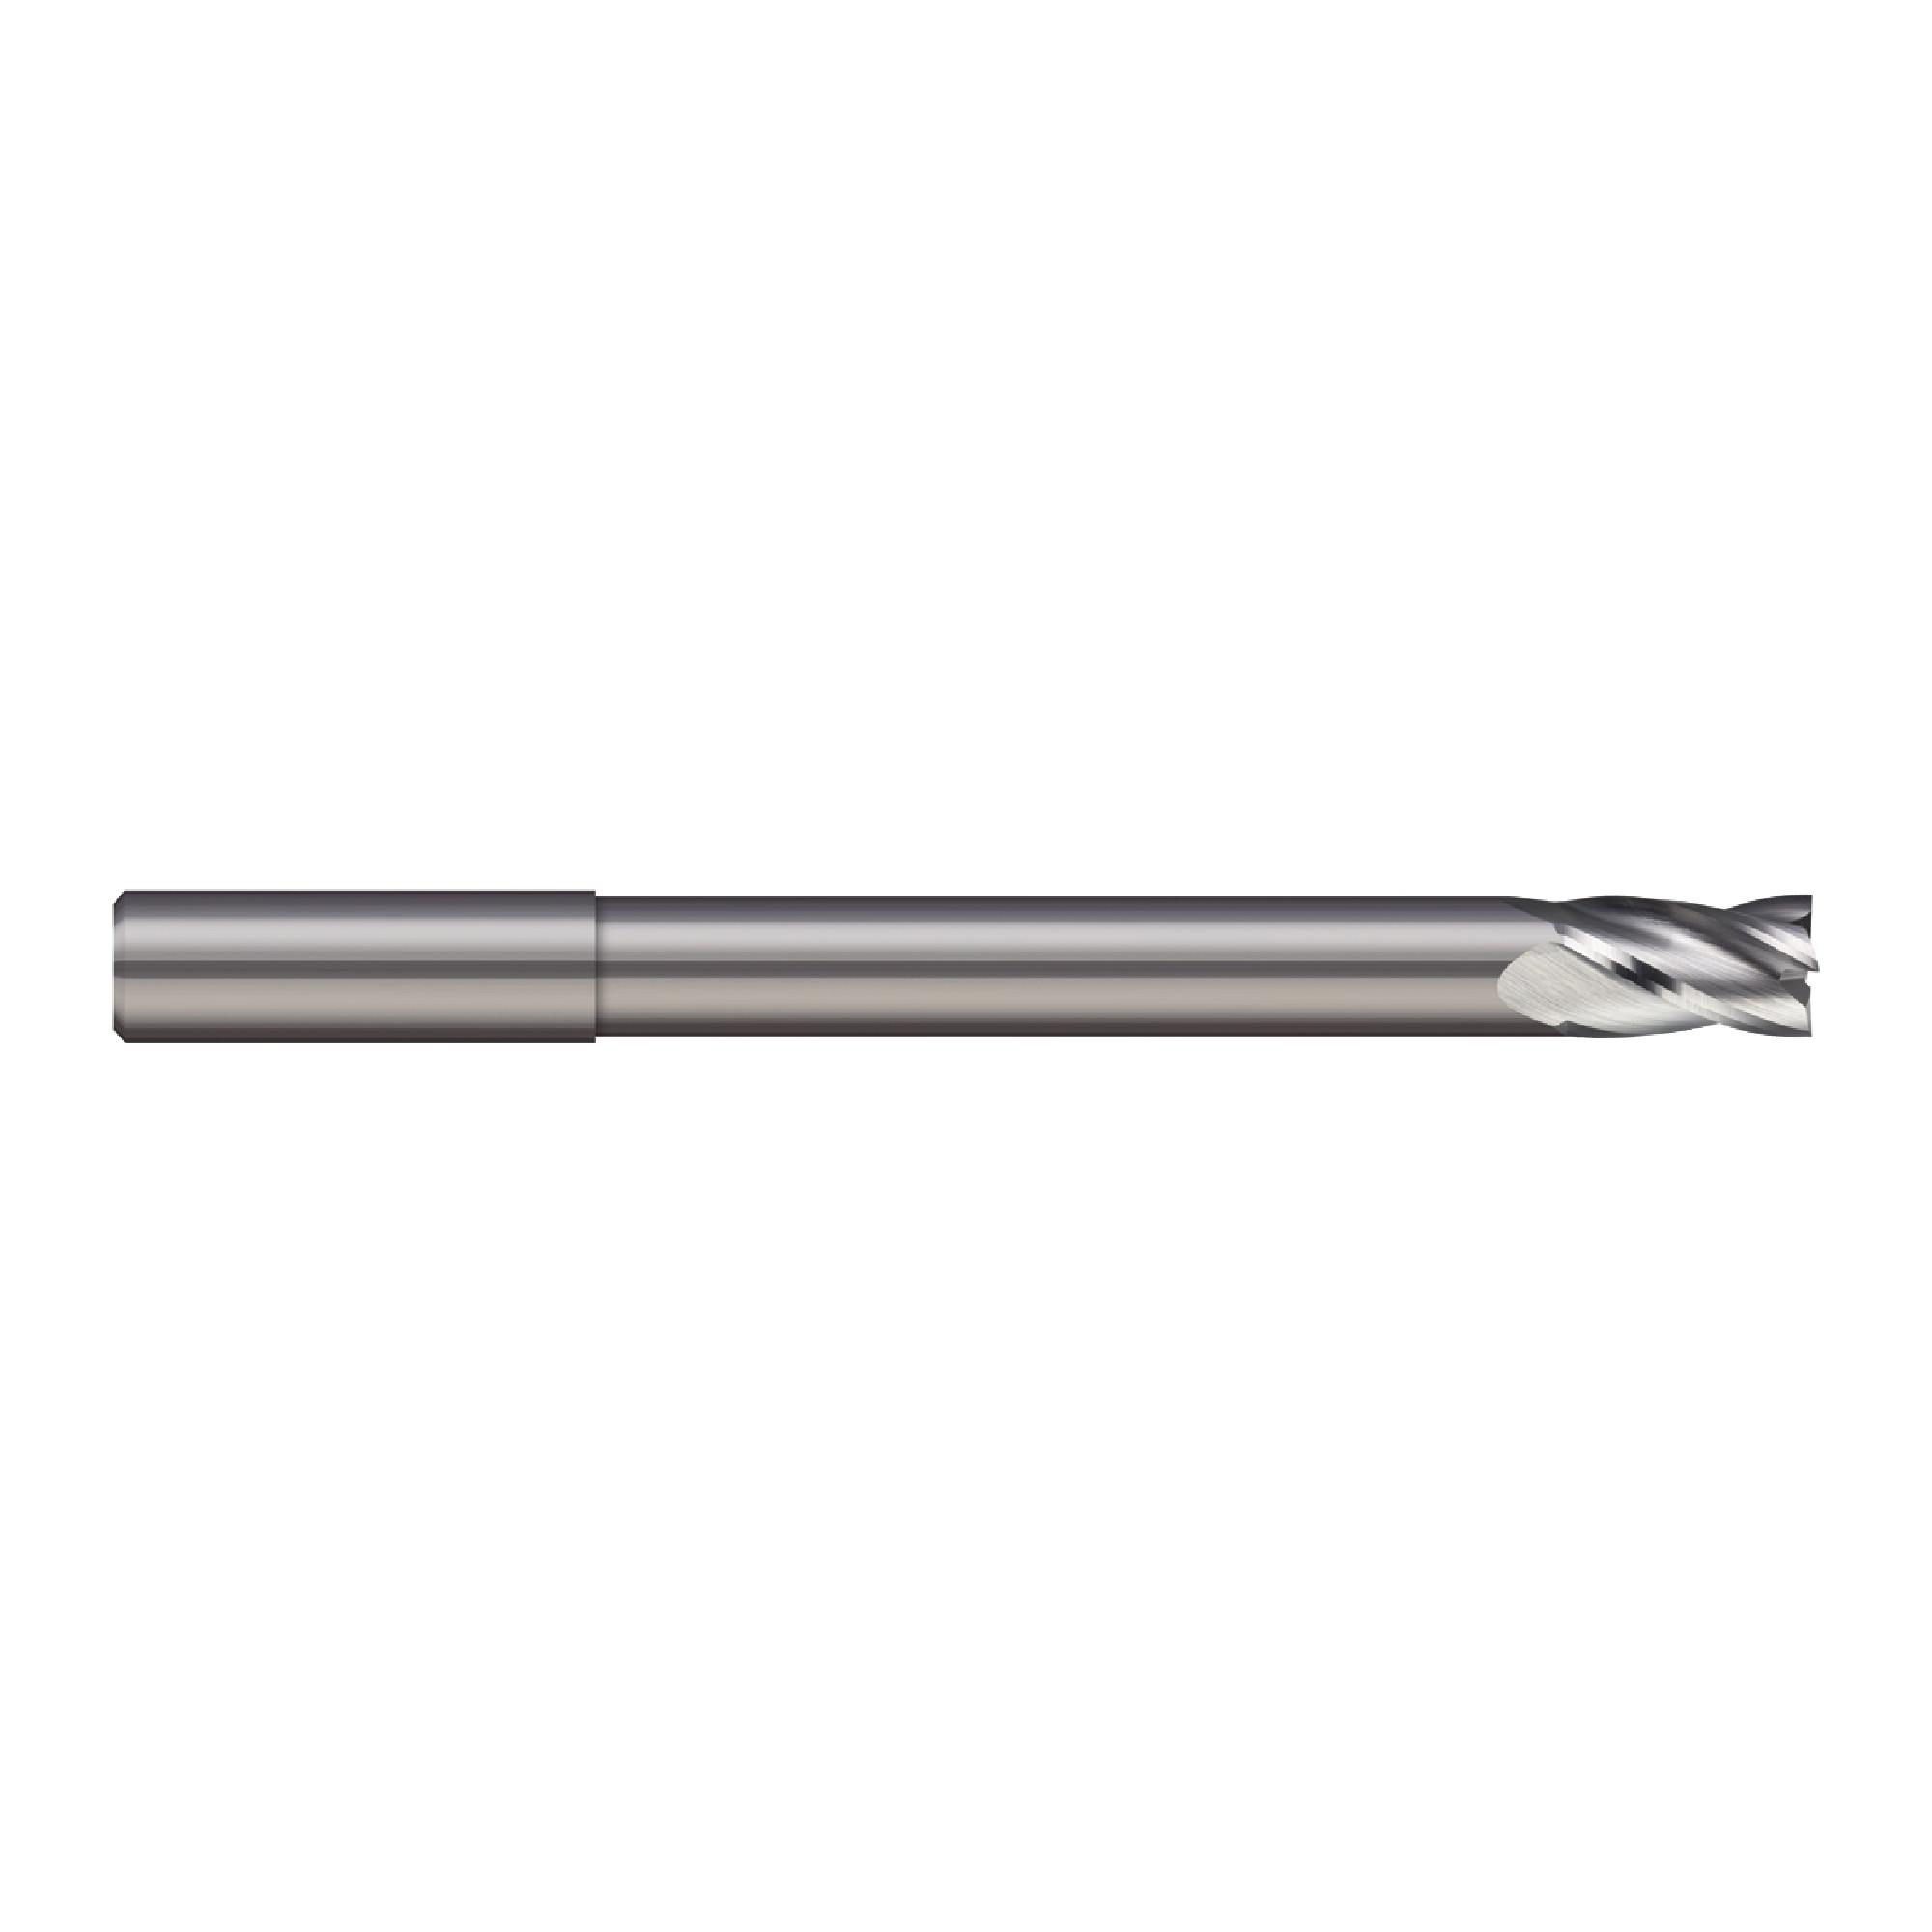 4 Flute Metric Solid Carbide Square End Extended Reach End Mill